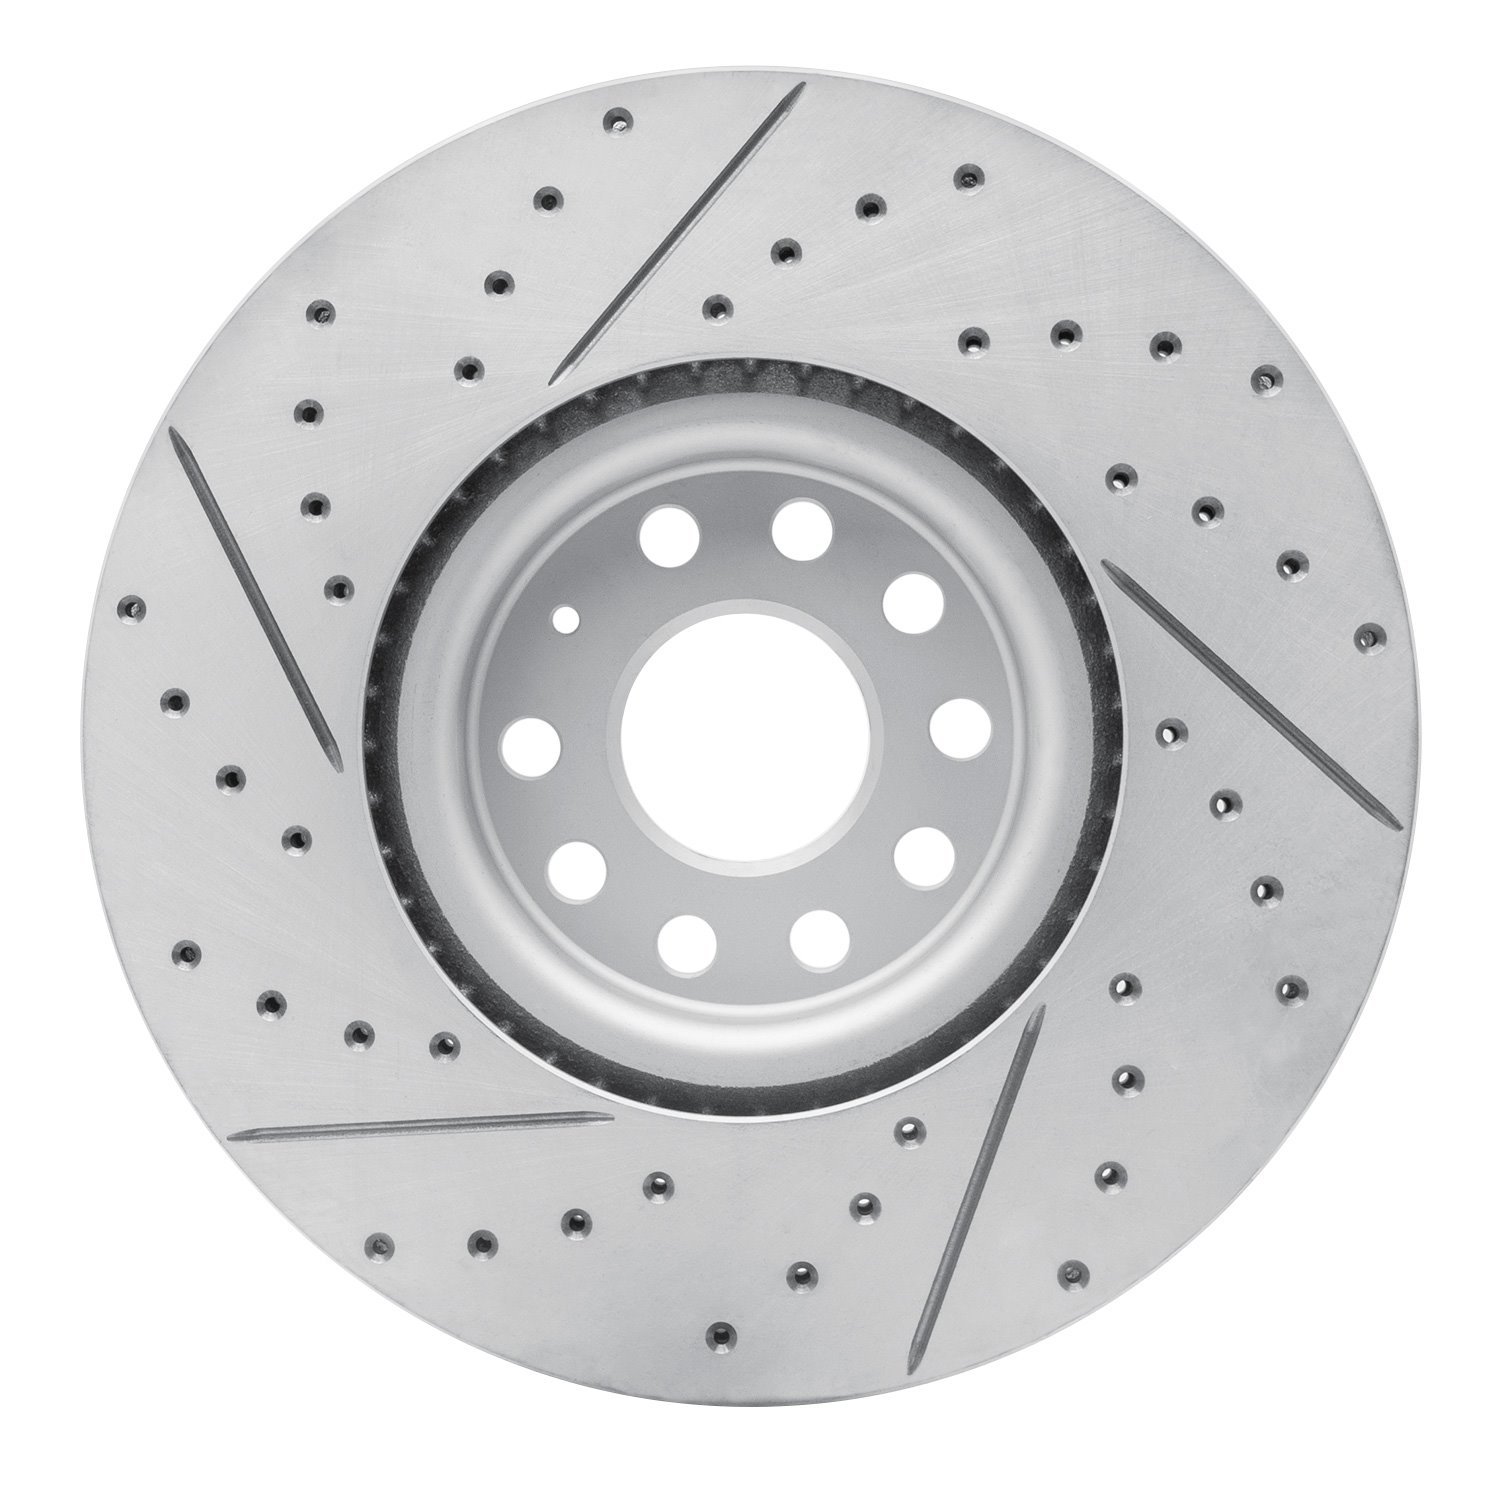 830-74058R Geoperformance Drilled/Slotted Brake Rotor, Fits Select Audi/Volkswagen, Position: Front Right